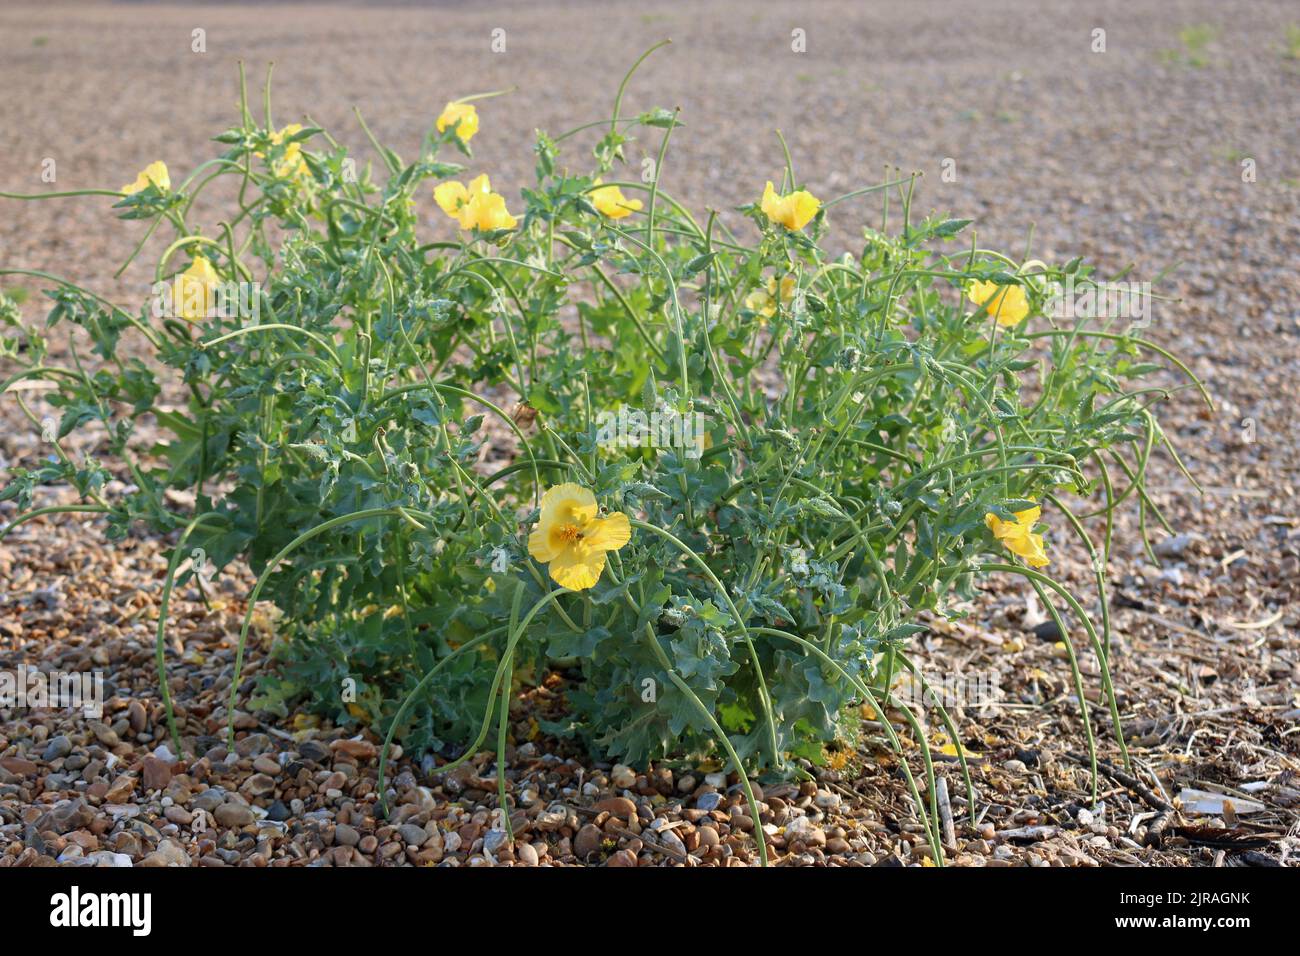 Yellow horned poppy, Glaucium flavum, plant with flowers and seed pods on a shingle beach of small pebbles blurred in the background. Stock Photo